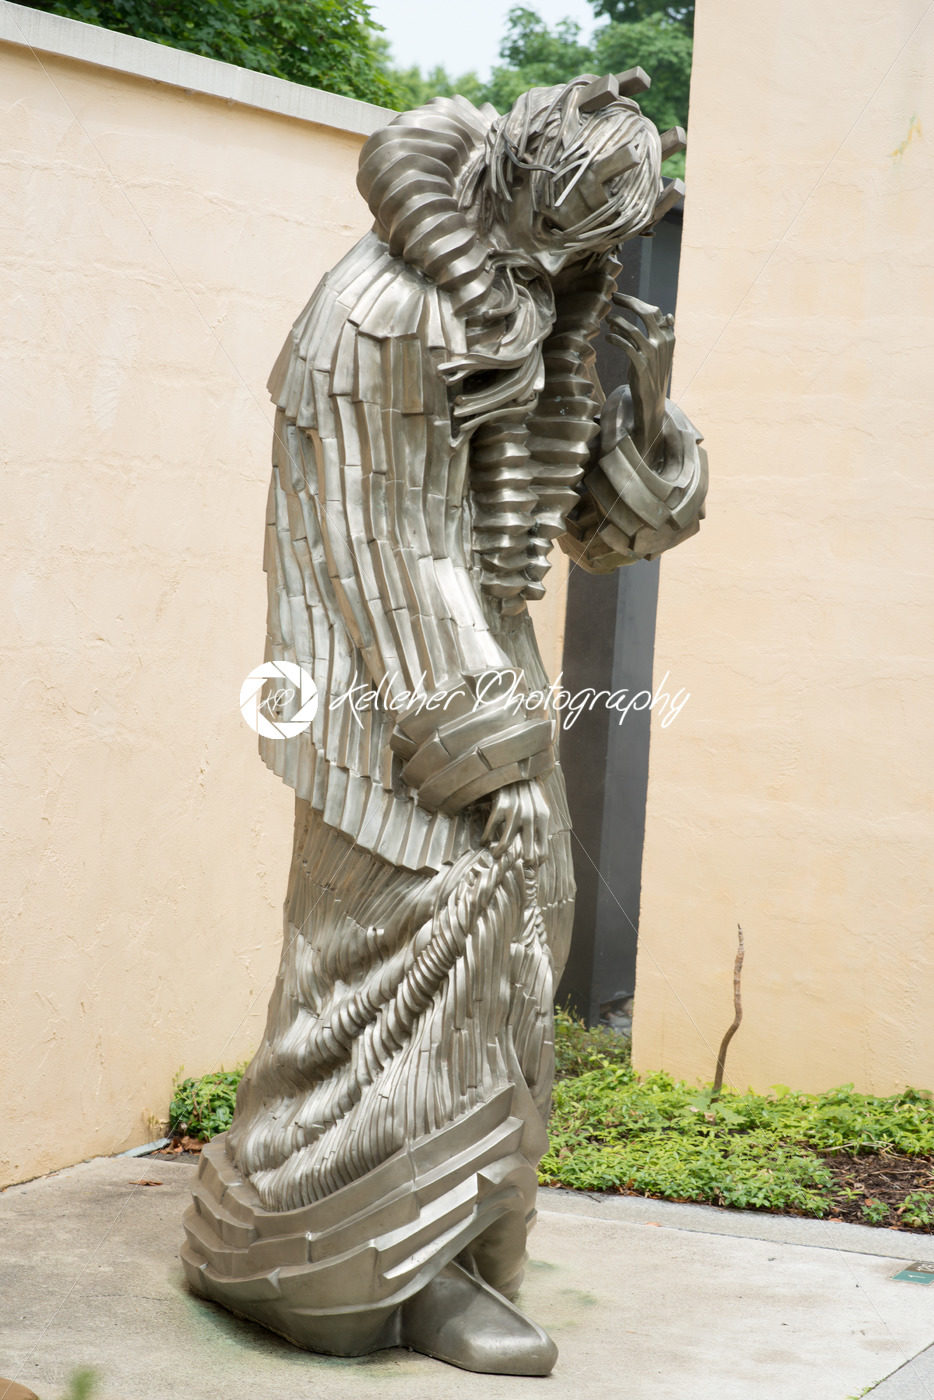 TRENTON, NJ – JUNE 17, 2017: King Lear by Seward Johnson at Grounds for Sculpture - Kelleher Photography Store